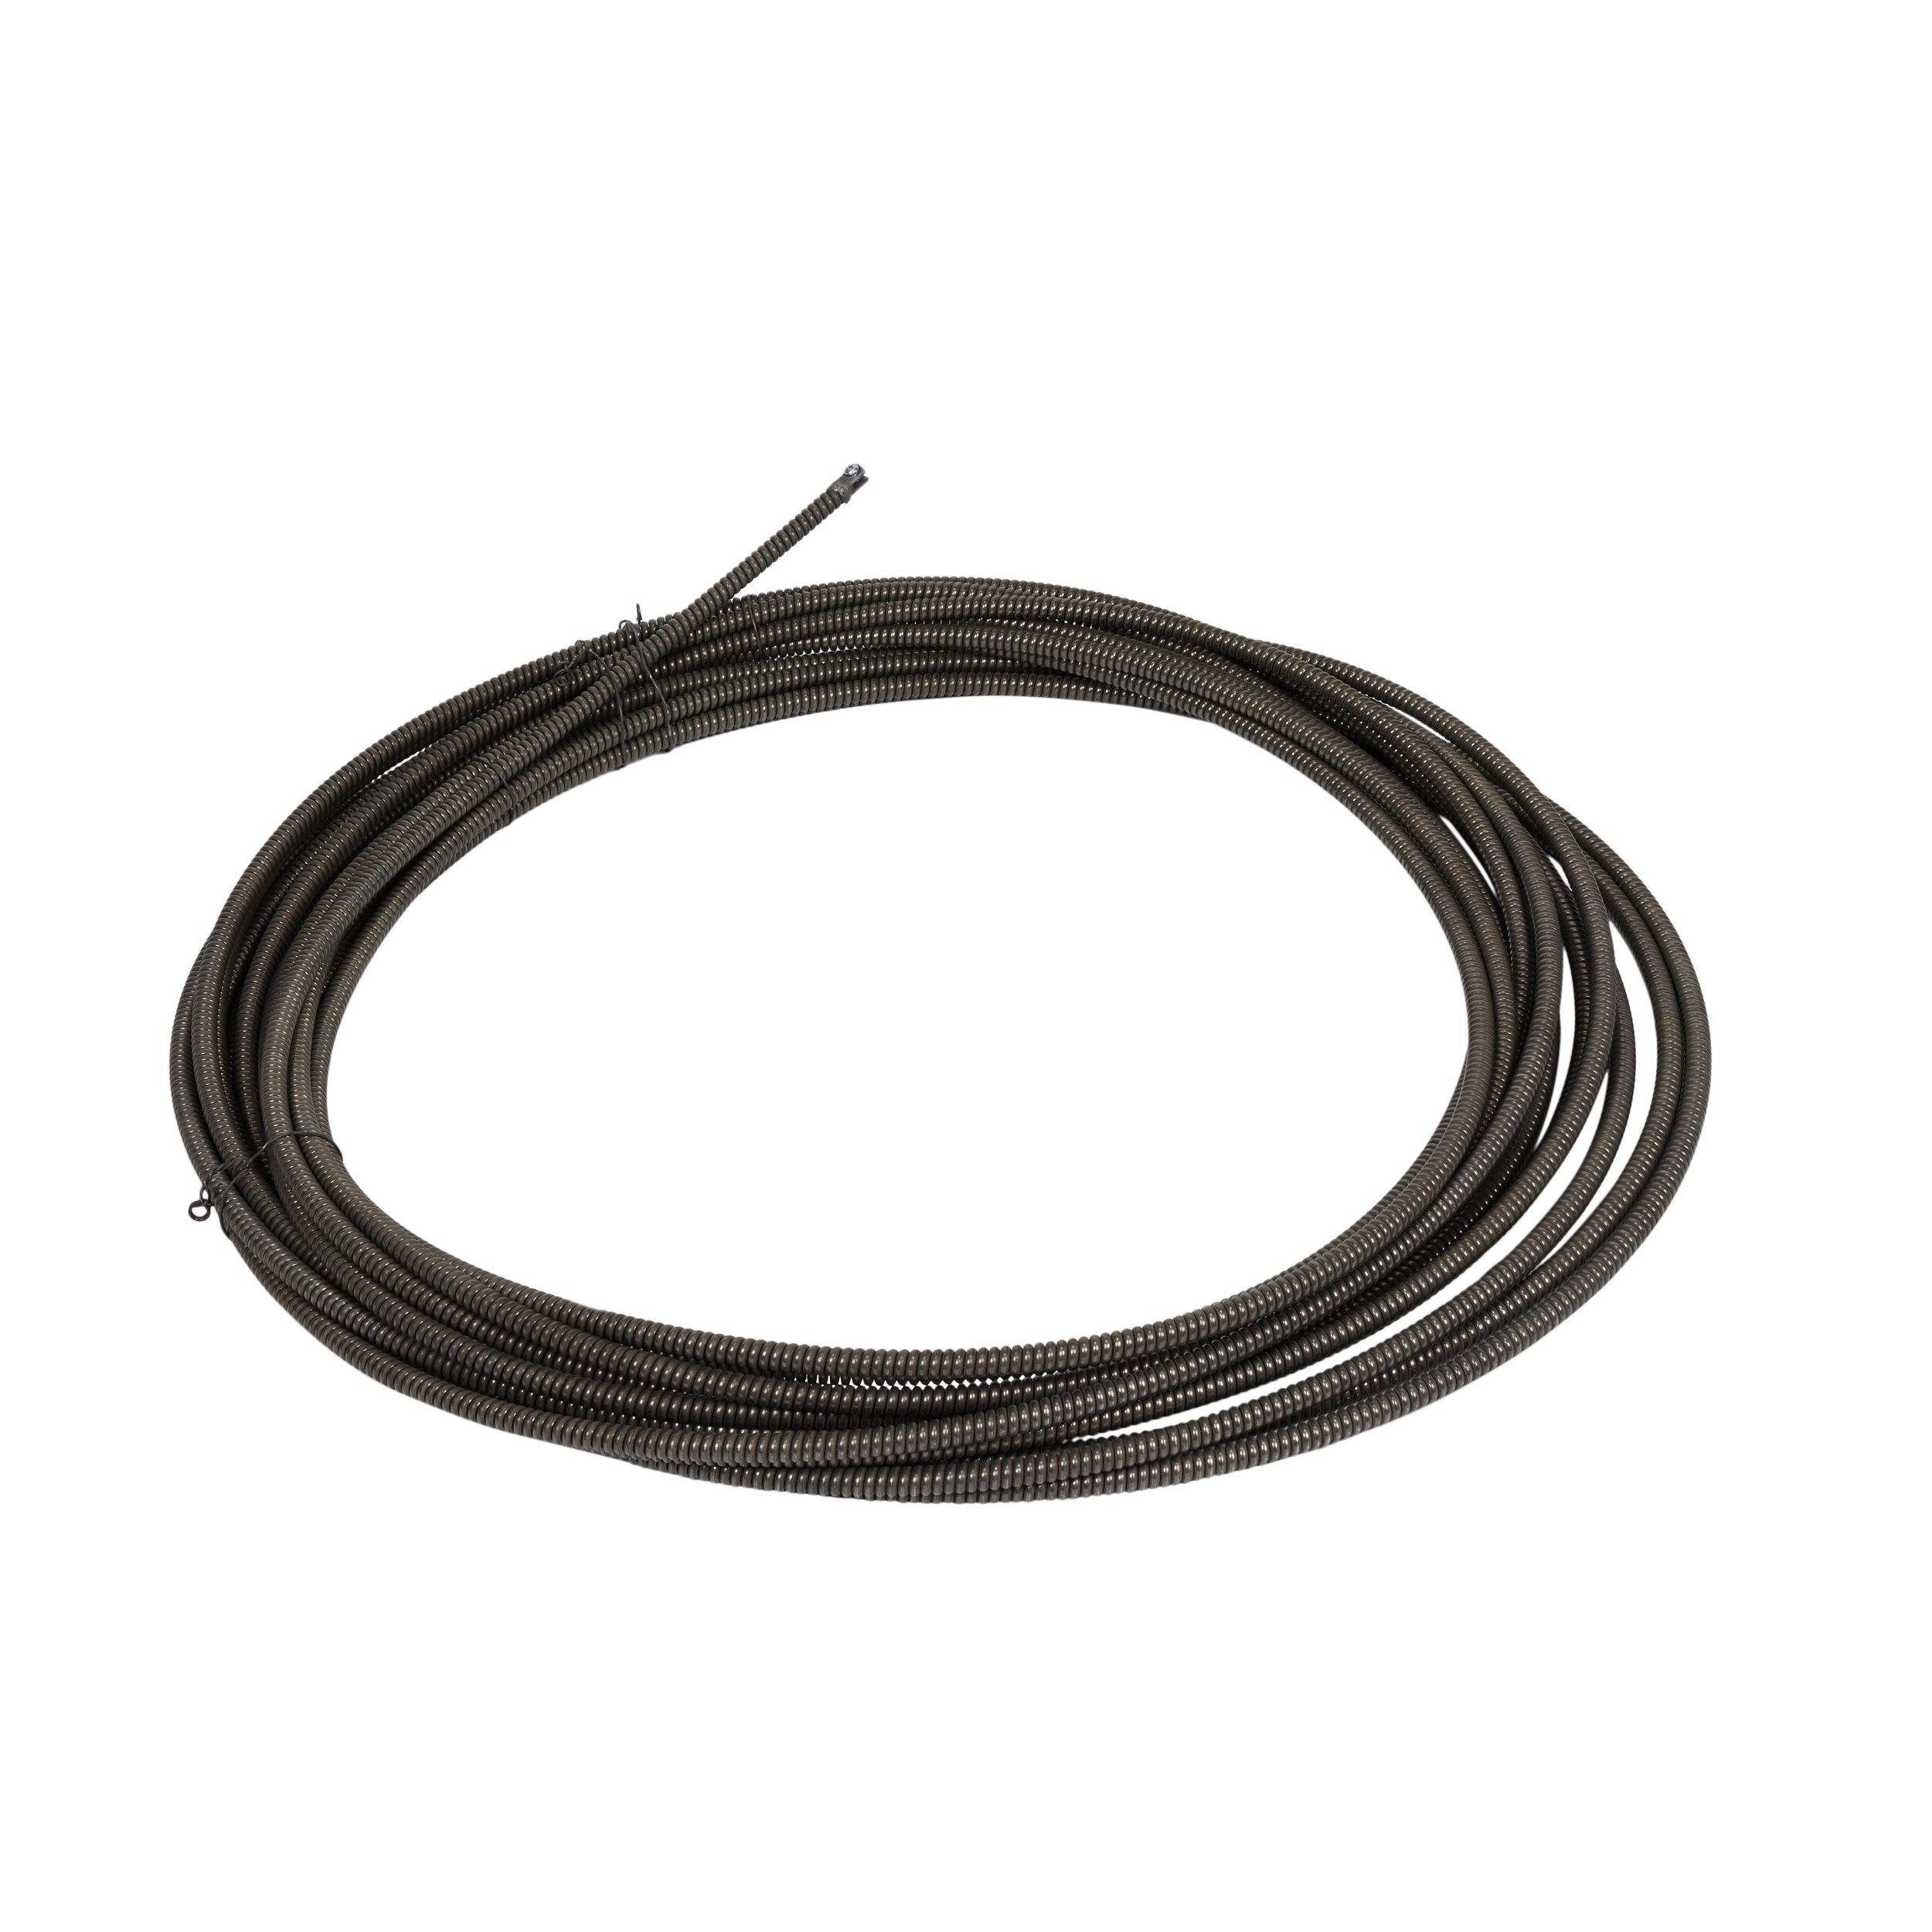 VEVORbrand Drain Cleaning Cable 75 Feet X 1/2 Inch Solid Core Cable Sewer  Cable Drain Auger Cable Cleaner Snake